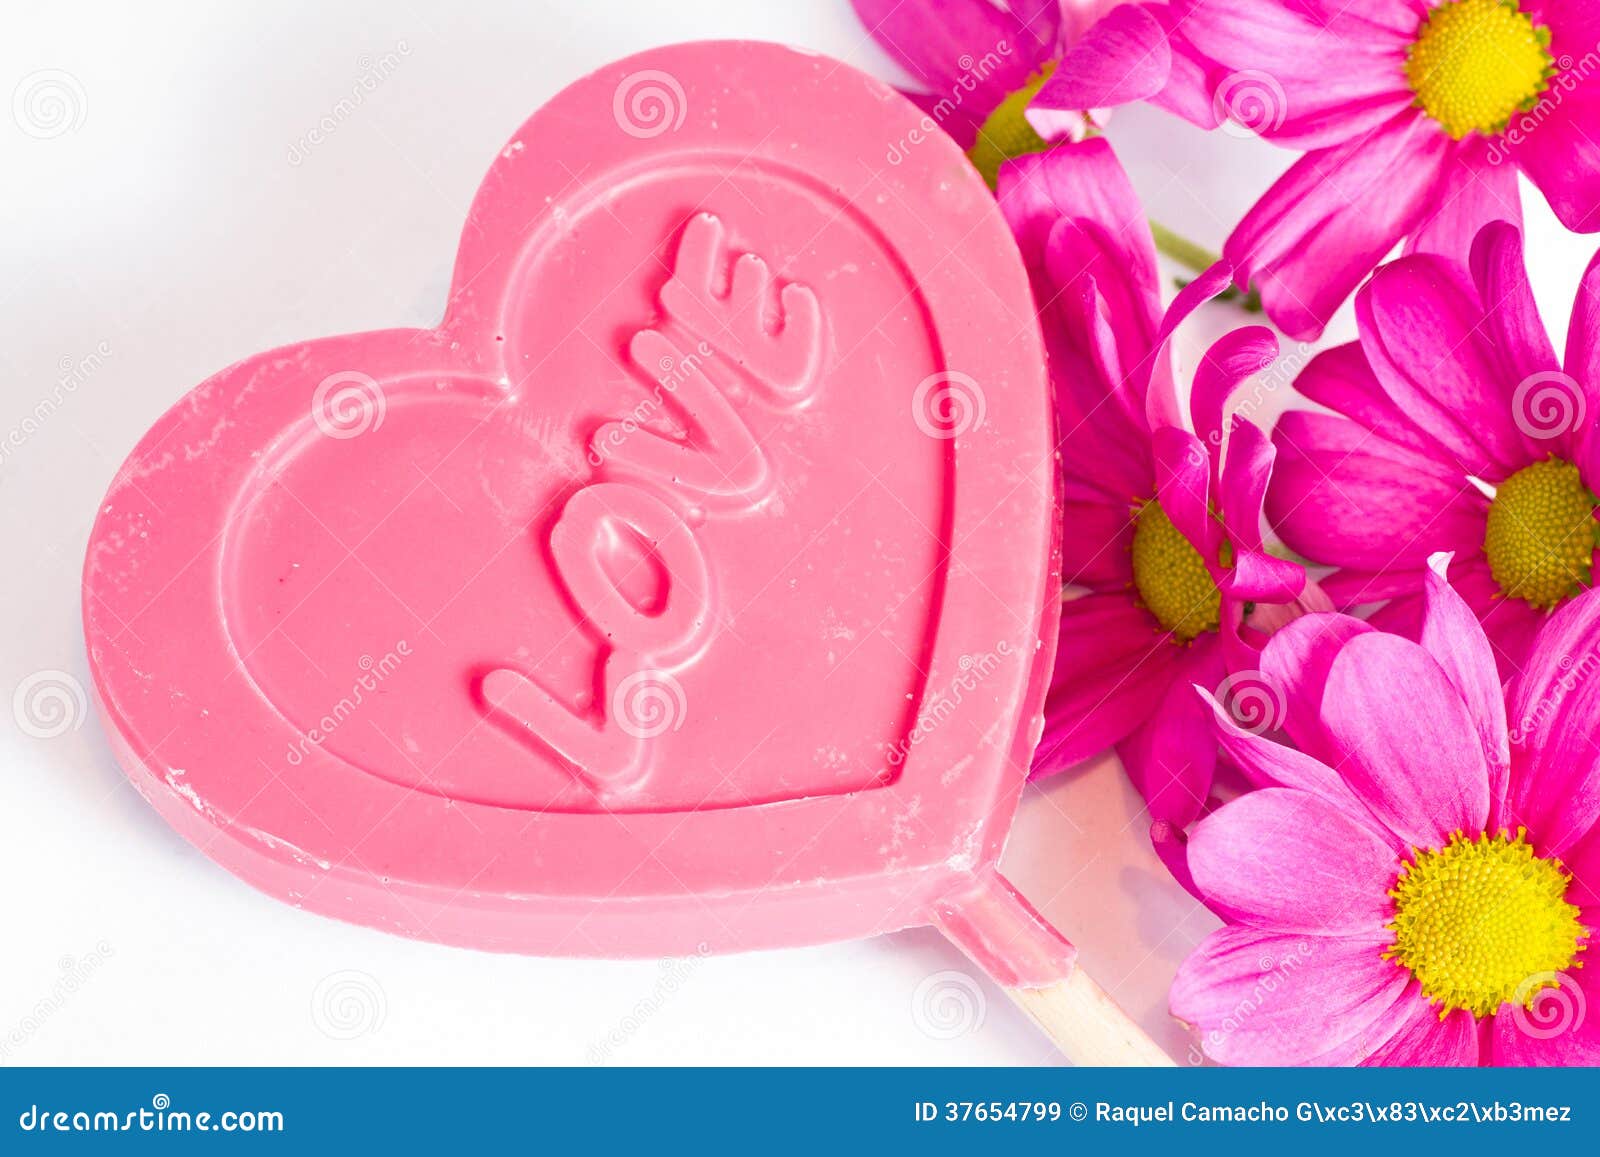 Sweet Love, Heart and Flowers. Stock Image - Image of february ...